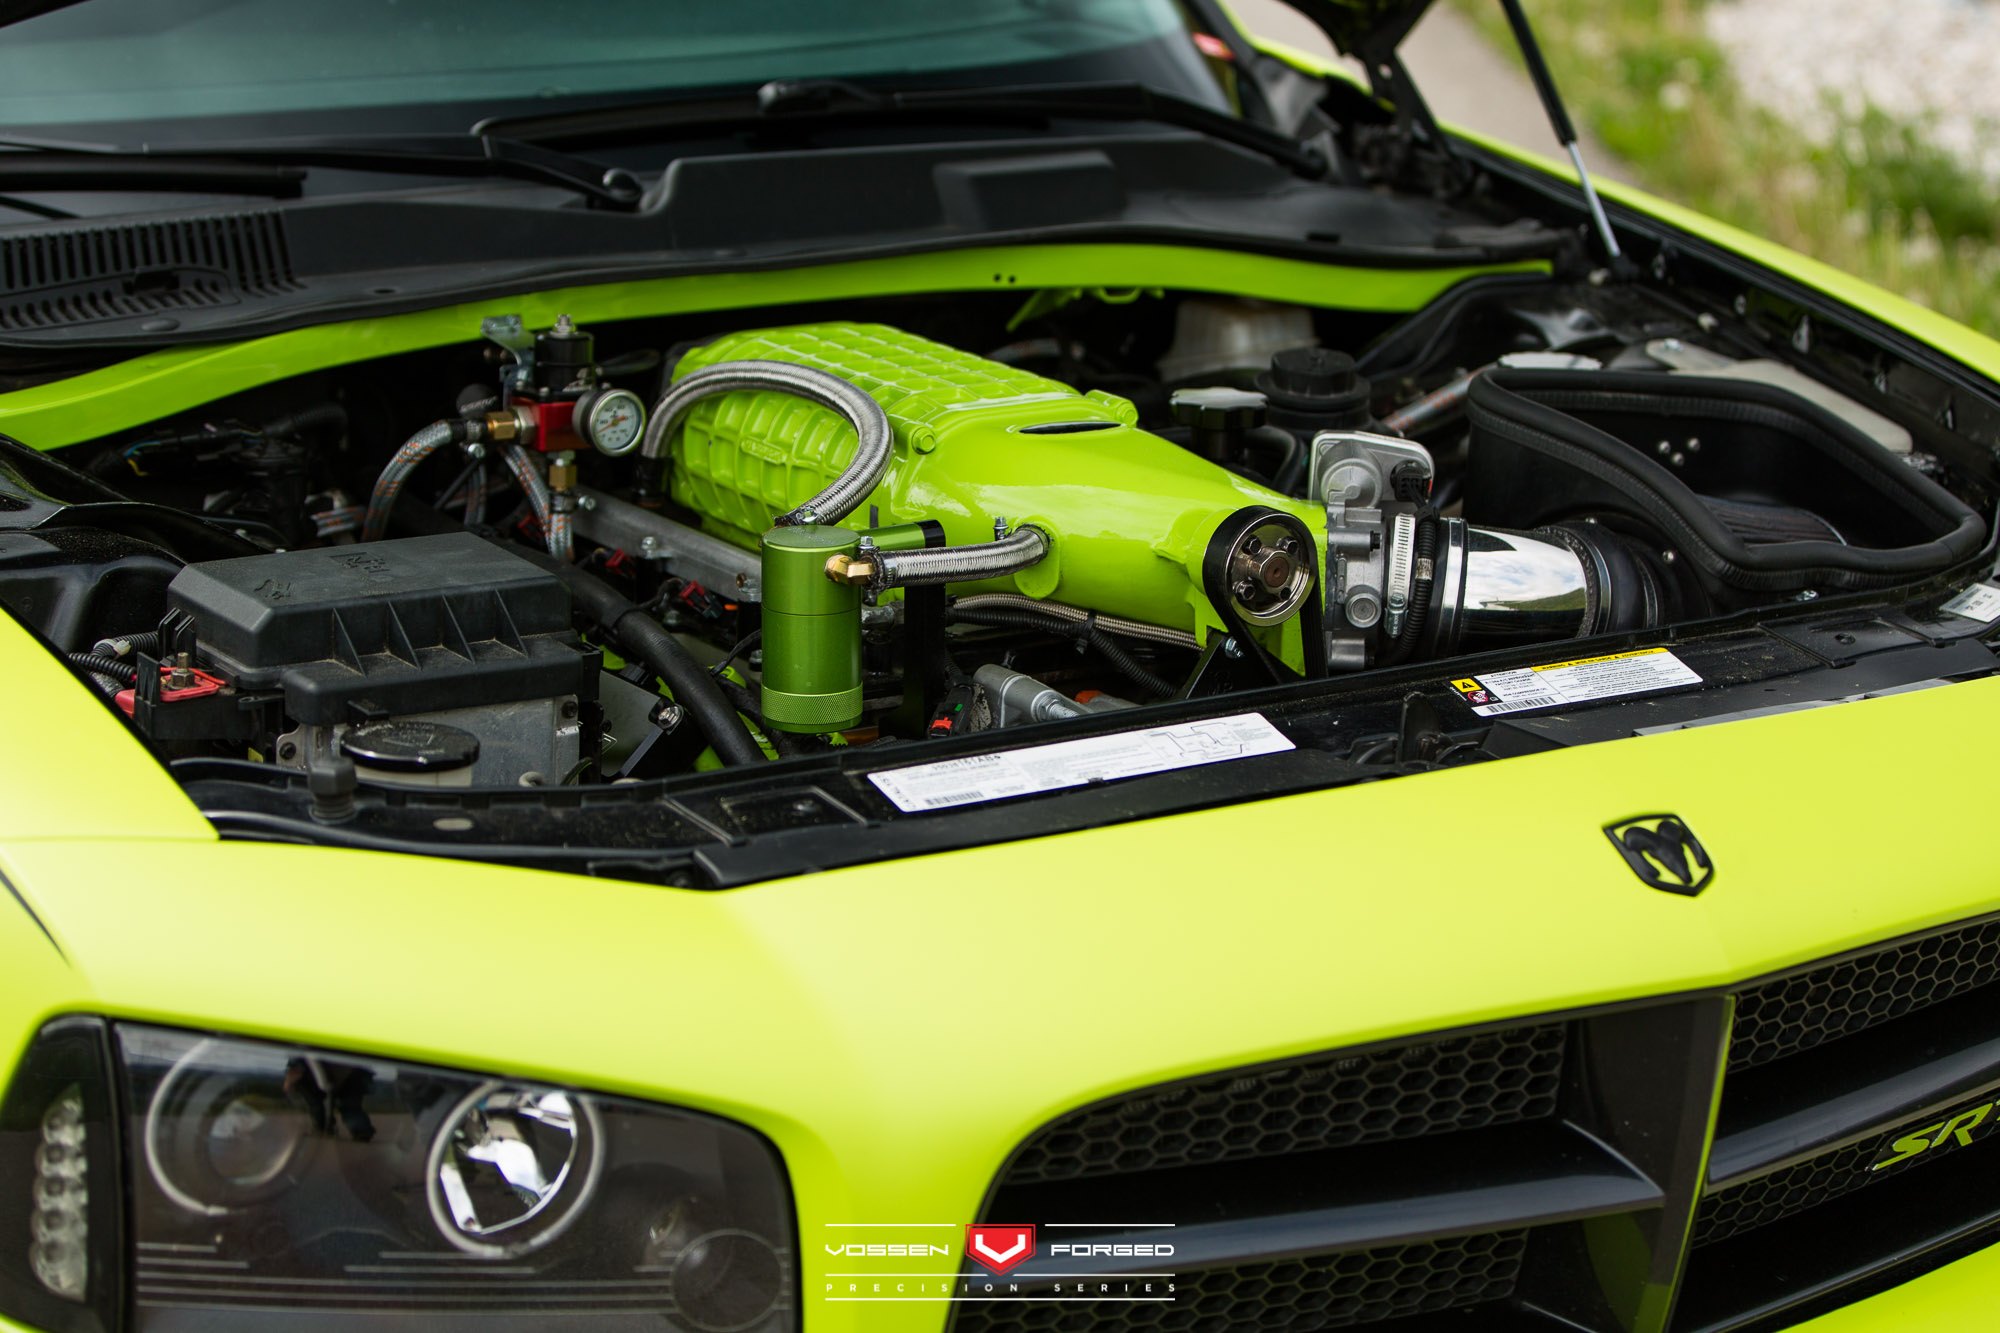 Custom Painted Engine Head on Dodge Charger Engine - Photo by Vossen